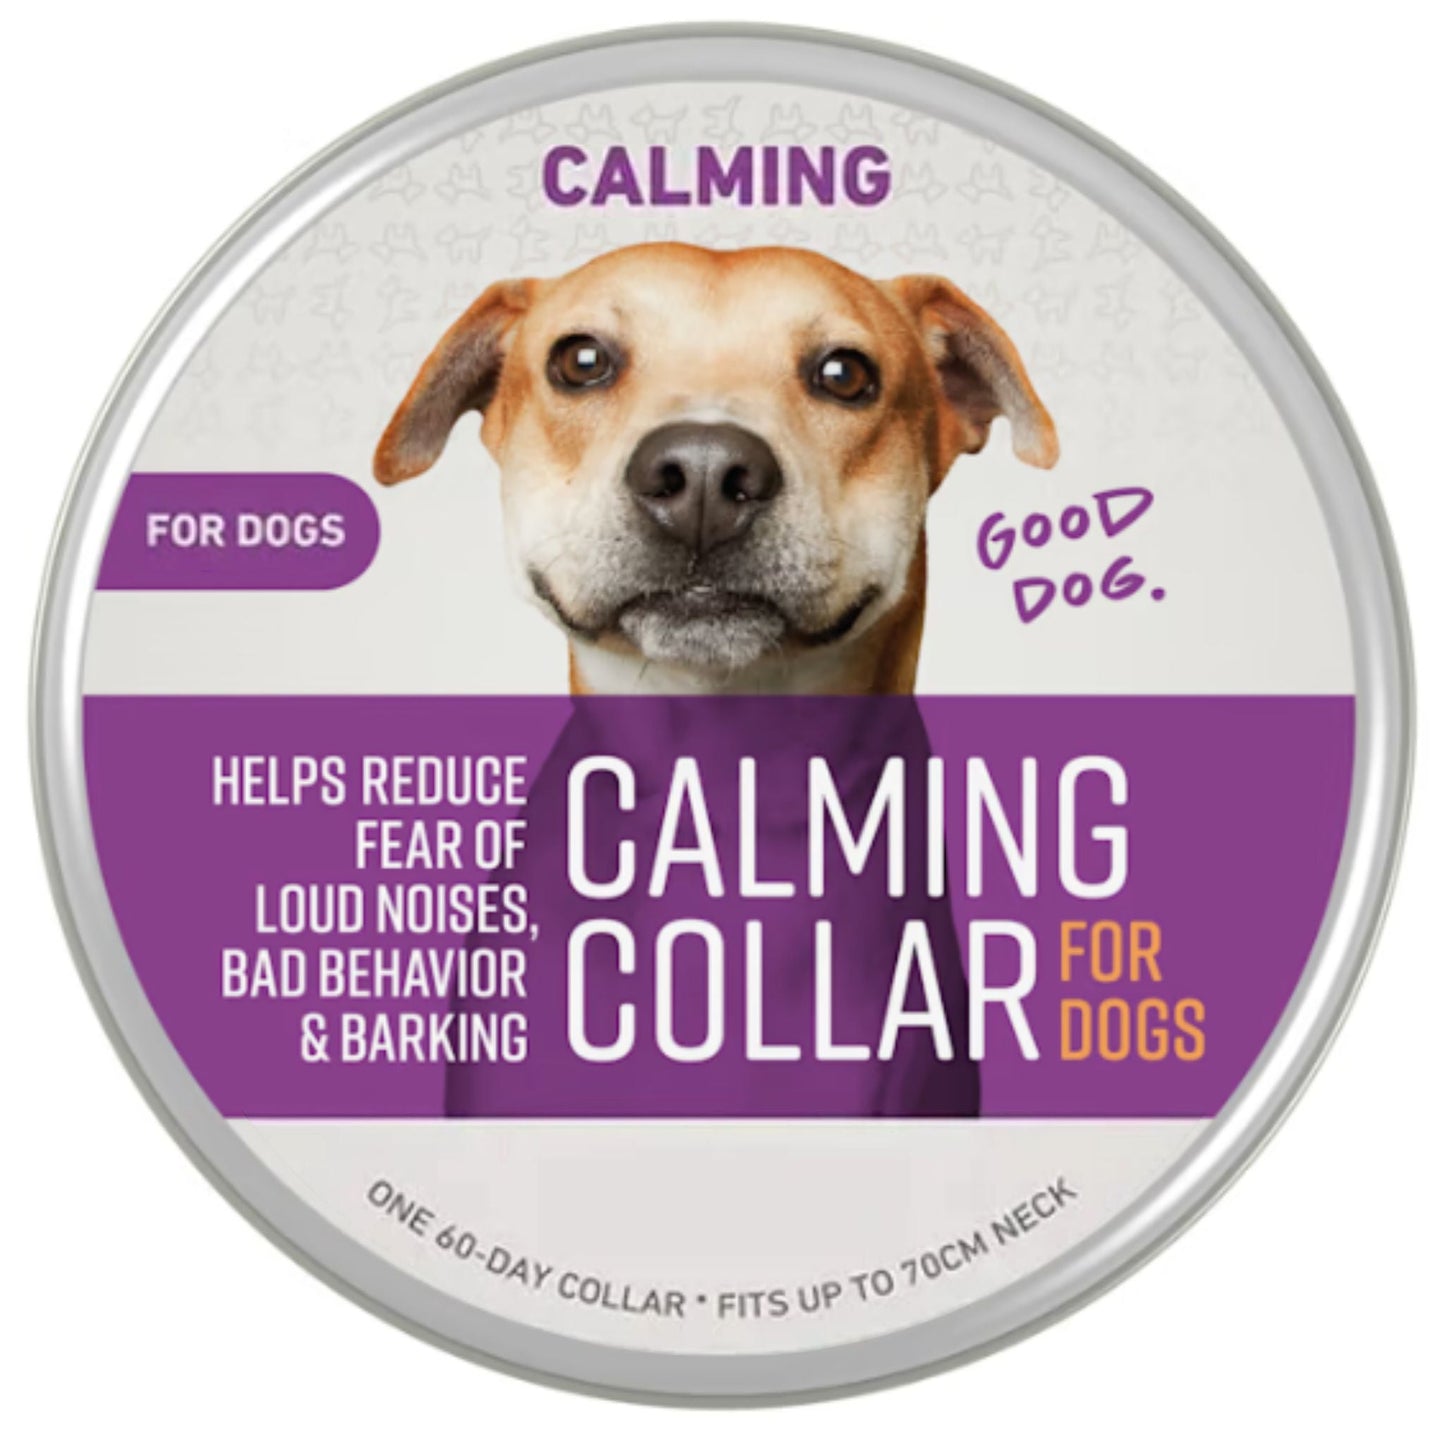 Purple Safe Dog Calming Collar 1Pack/60Days Adjustable Anxiety Reduction Pheromone Lasting Natural Calm Pet Collar Boxed OPP Bag